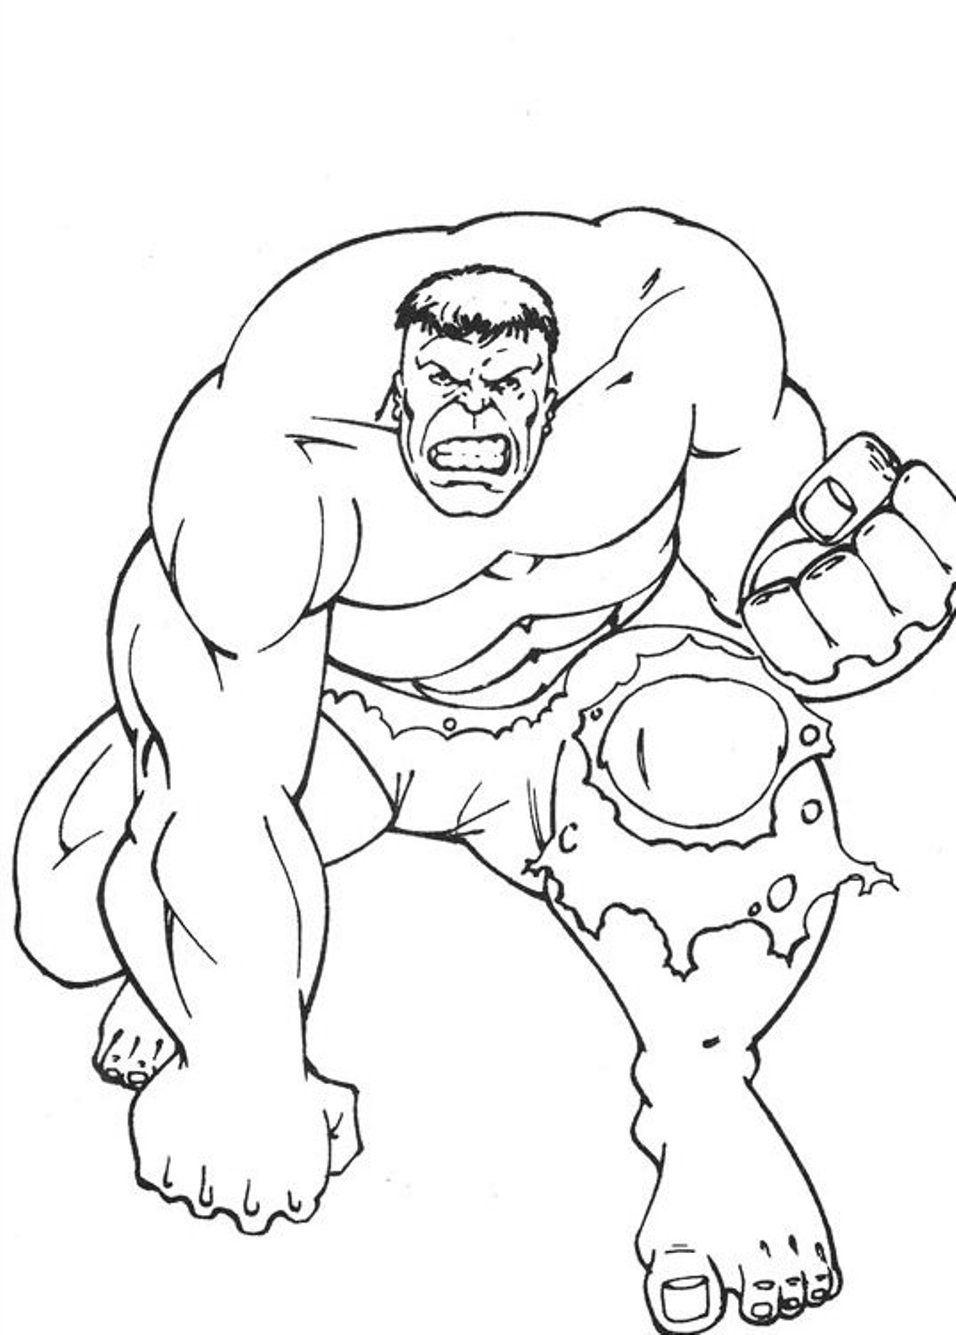 Awesome Hulk S5b3f Coloring Page